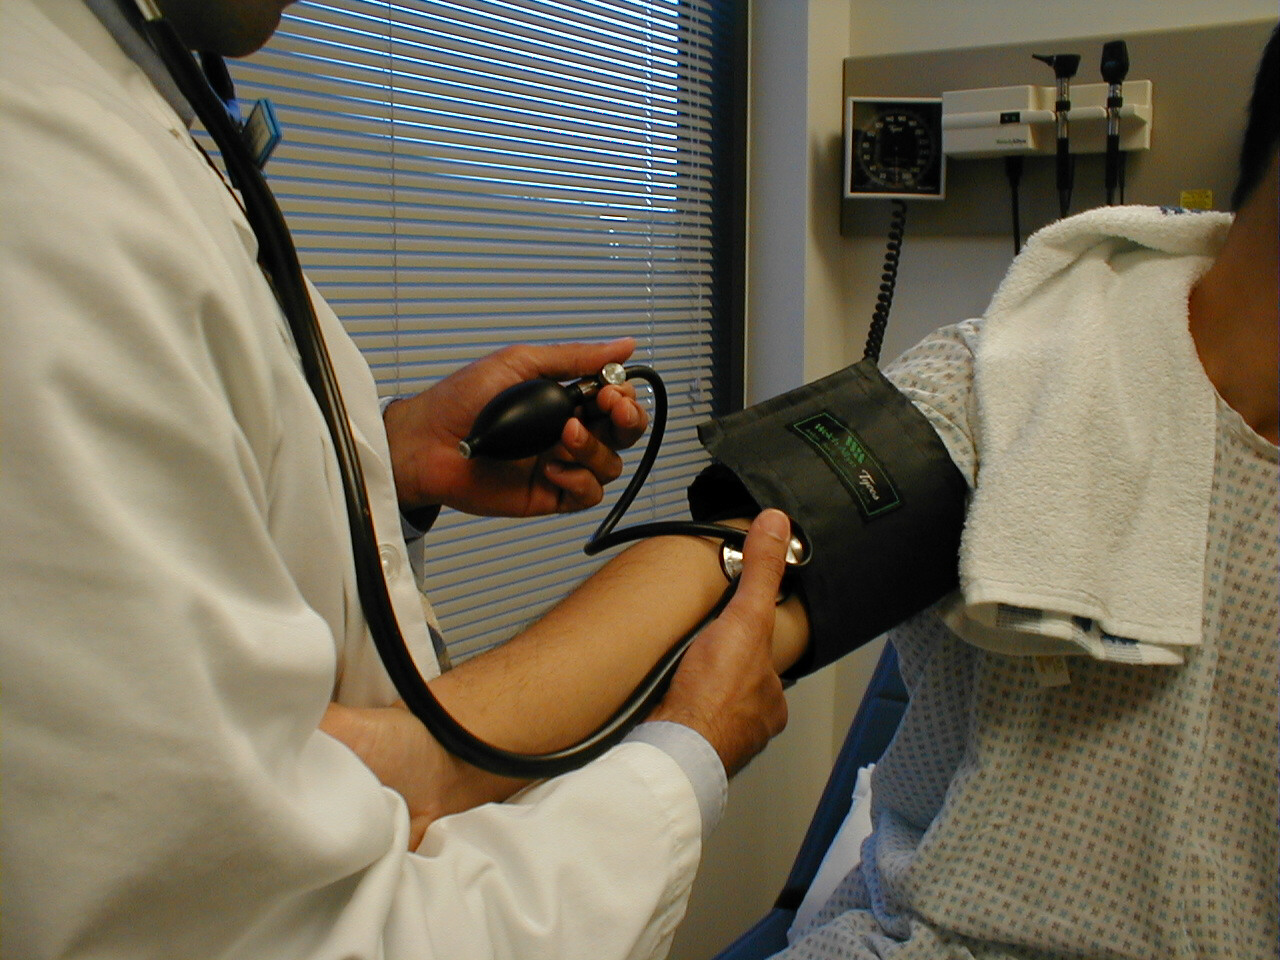 Measuring the blood pressure